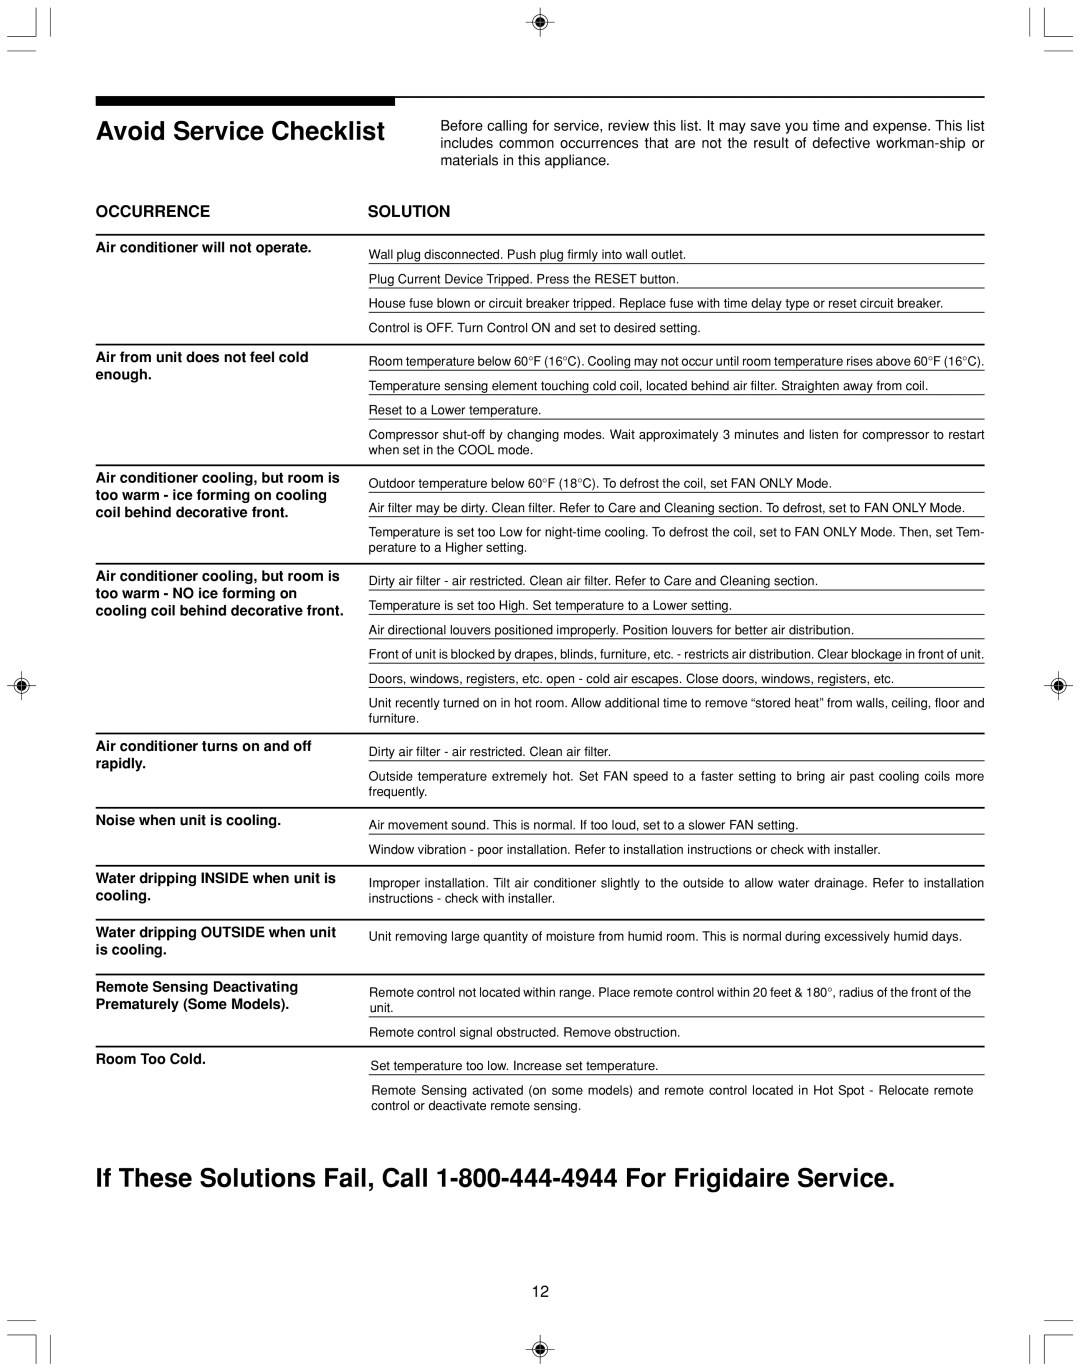 Frigidaire P/N 66121617 Avoid Service Checklist, If These Solutions Fail, Call 1-800-444-4944 For Frigidaire Service 